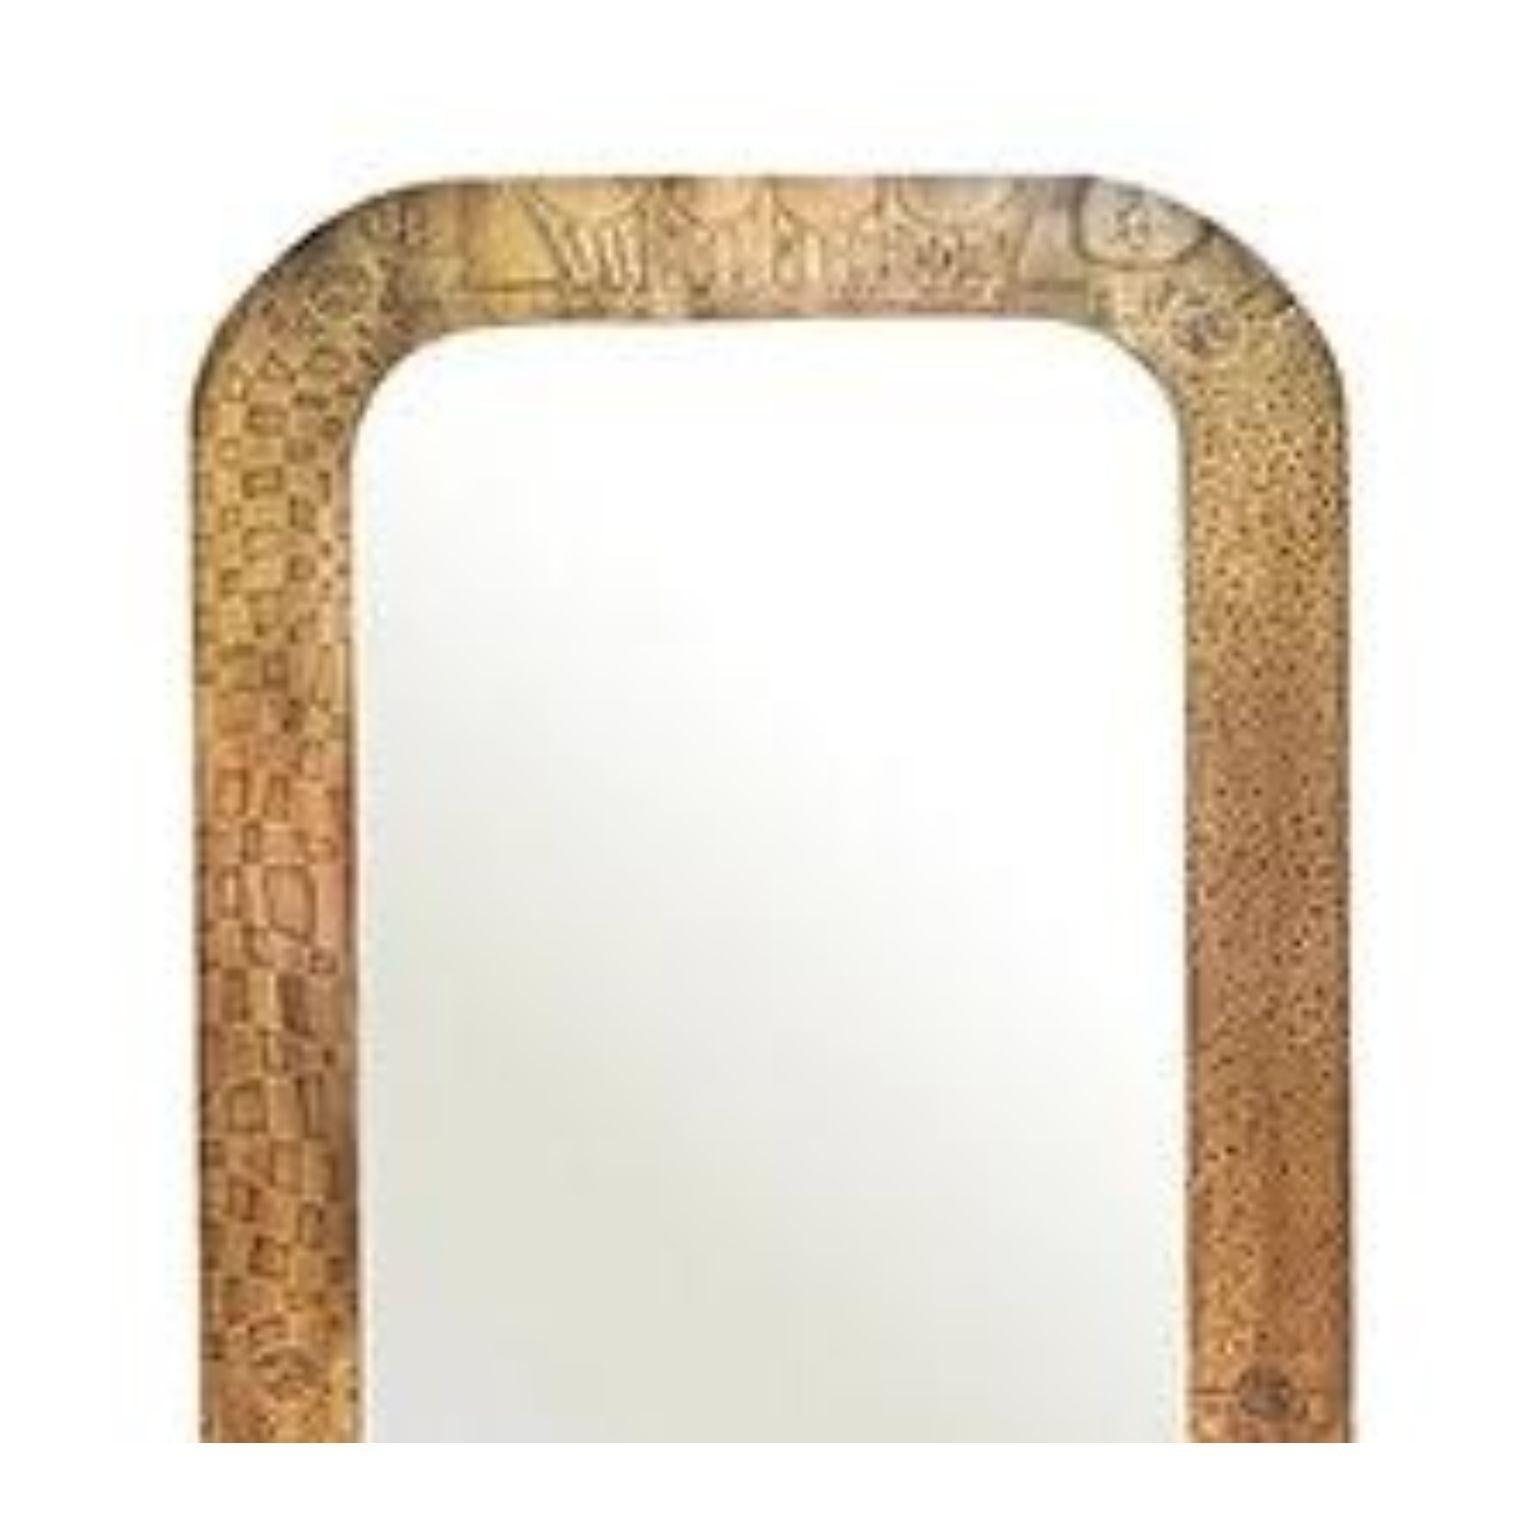 Royal Wall Mirror by Brutalist Be
One Of A Kind
Dimensions: D 2 x W 73 x H 173 cm.
Materials: Brass and mirror. 

Brass acid etched black patinated wall mirror. A combination of simple hand drawn pattern with hand written King or Queen? on the